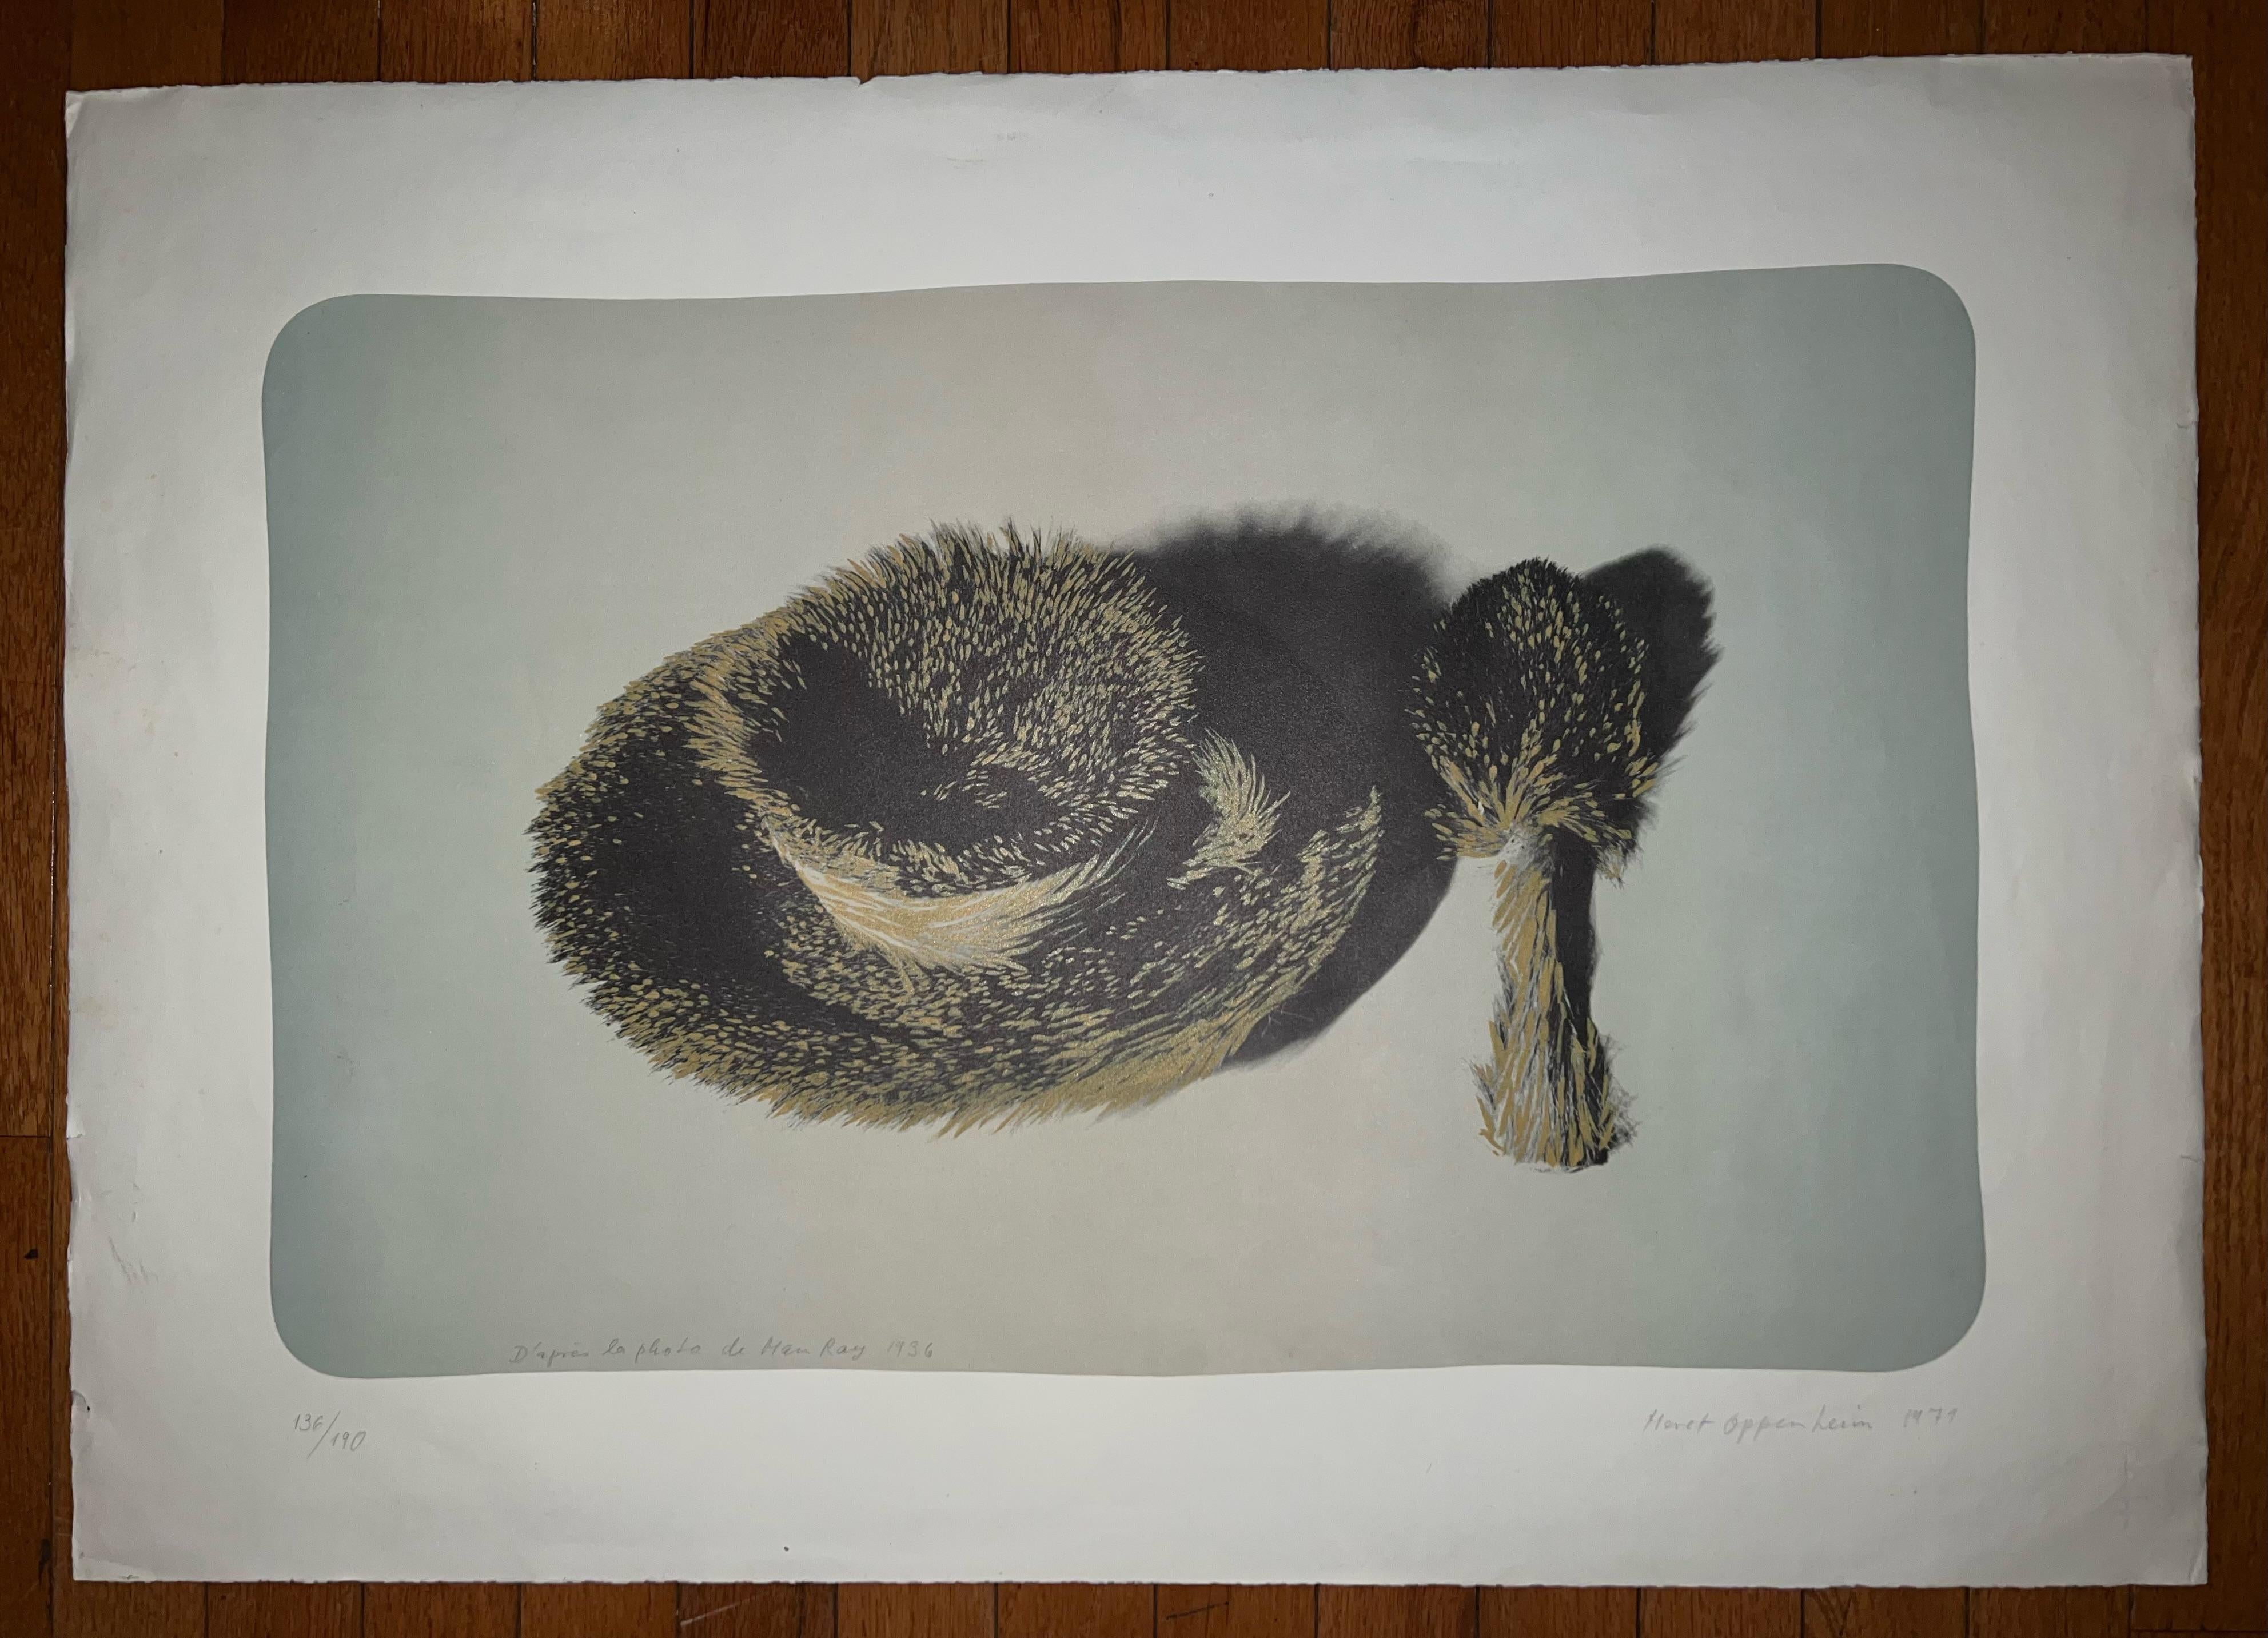 American Méret Oppenheim and Man Ray Print Fur Cup Object, 1971, Signed in Pencil